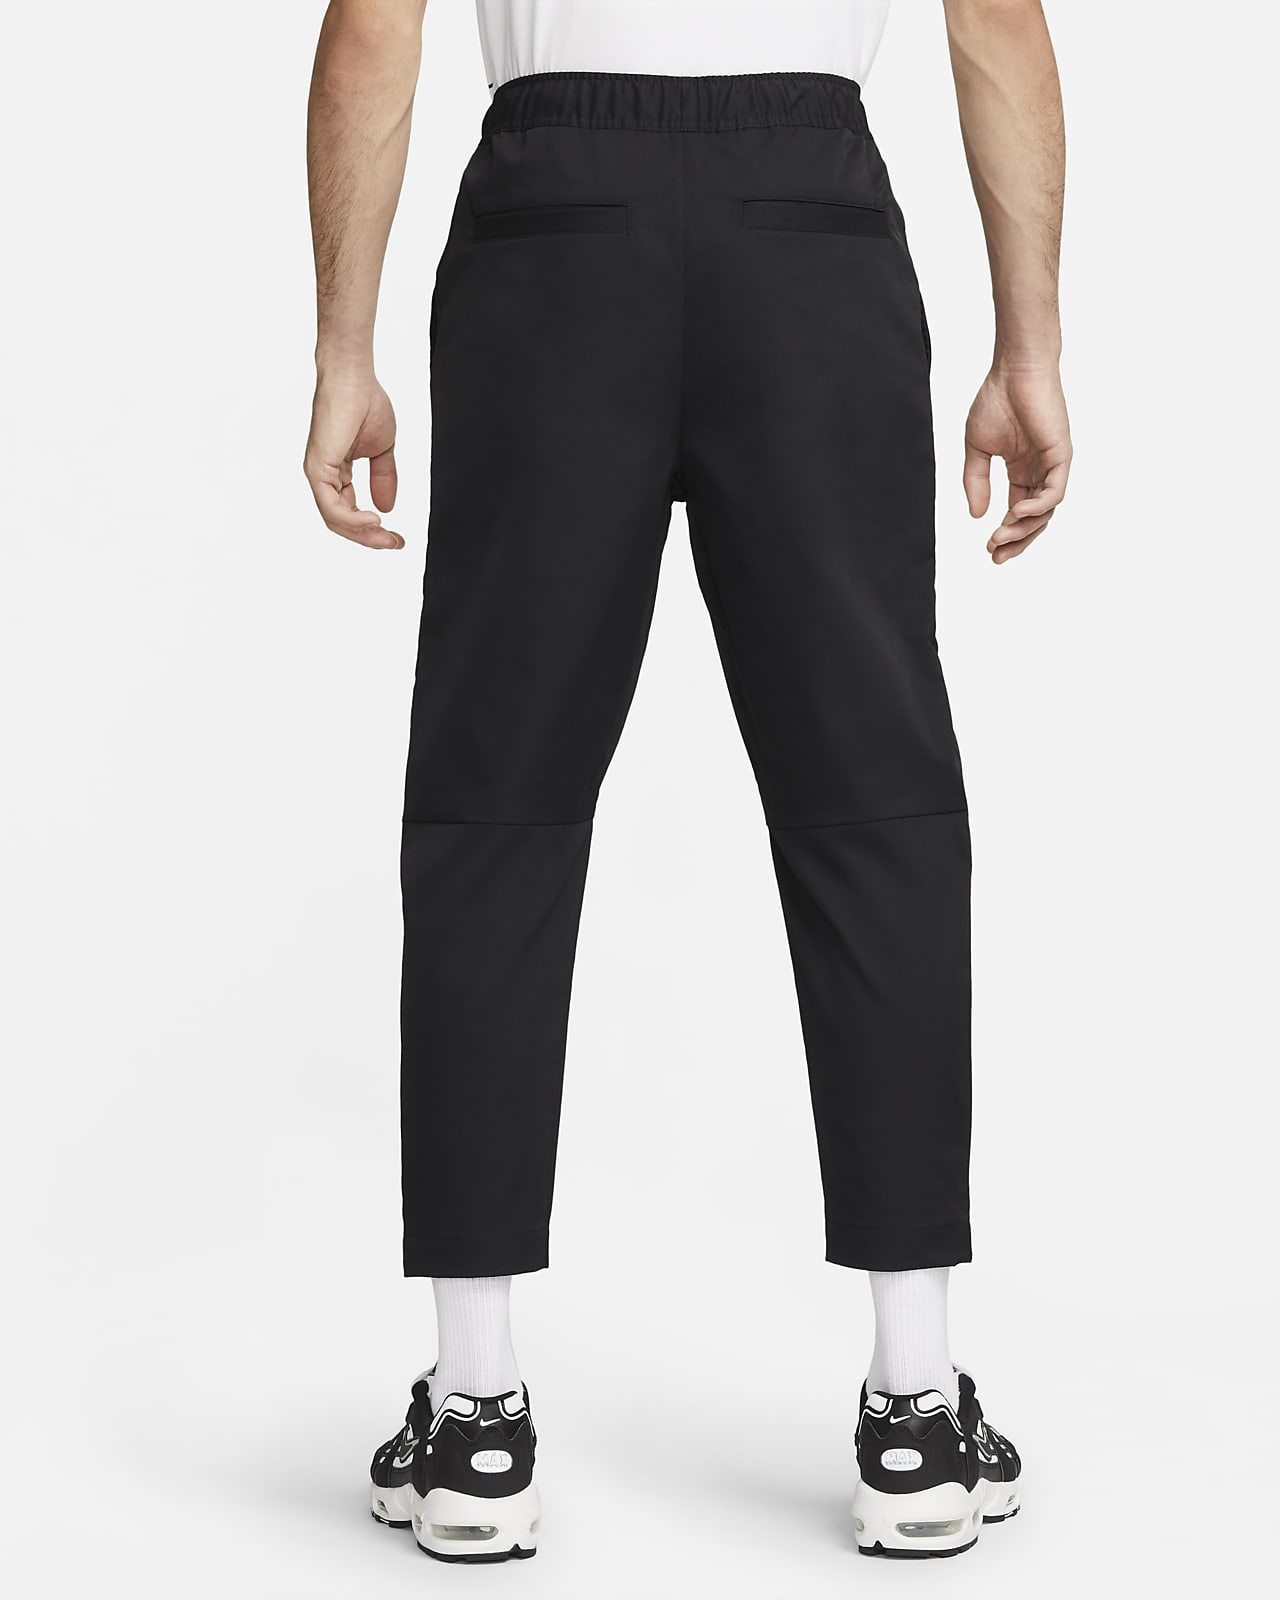 Nike Therma-FIT Men s Winterized Training Pants - Top4Running.ie